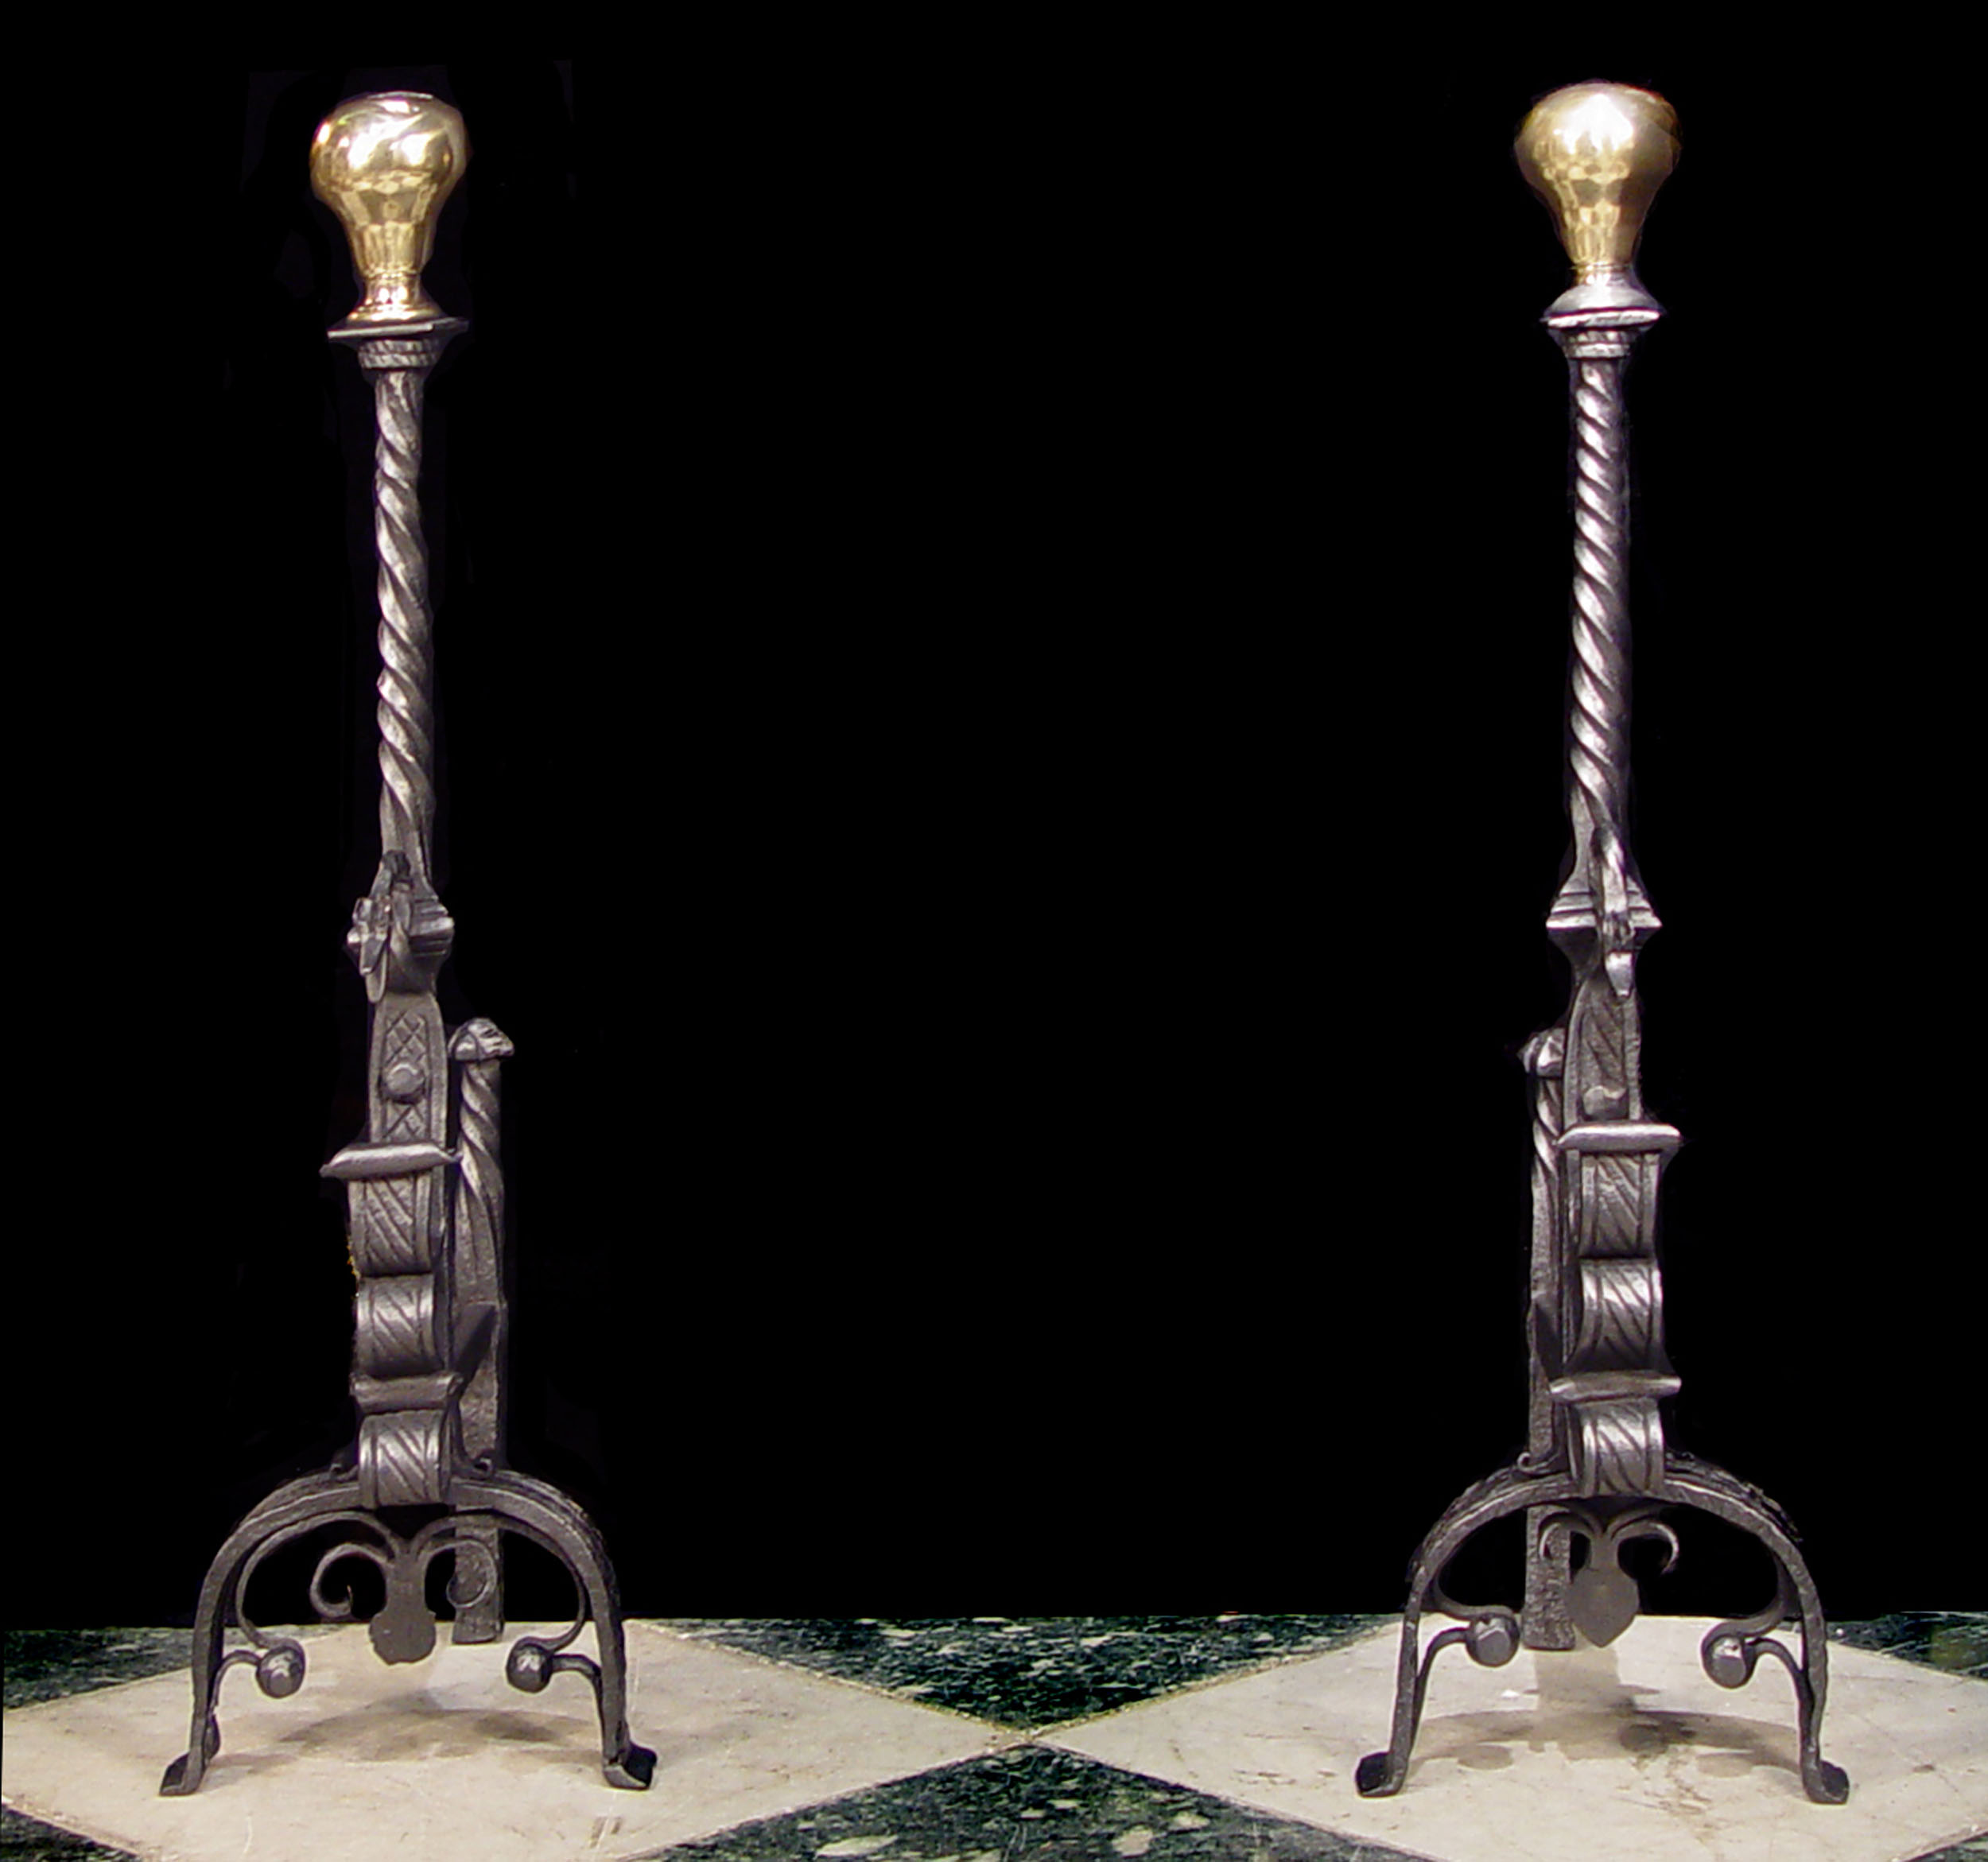 A Tall Pair of Ornate Jacobean Style Andirons